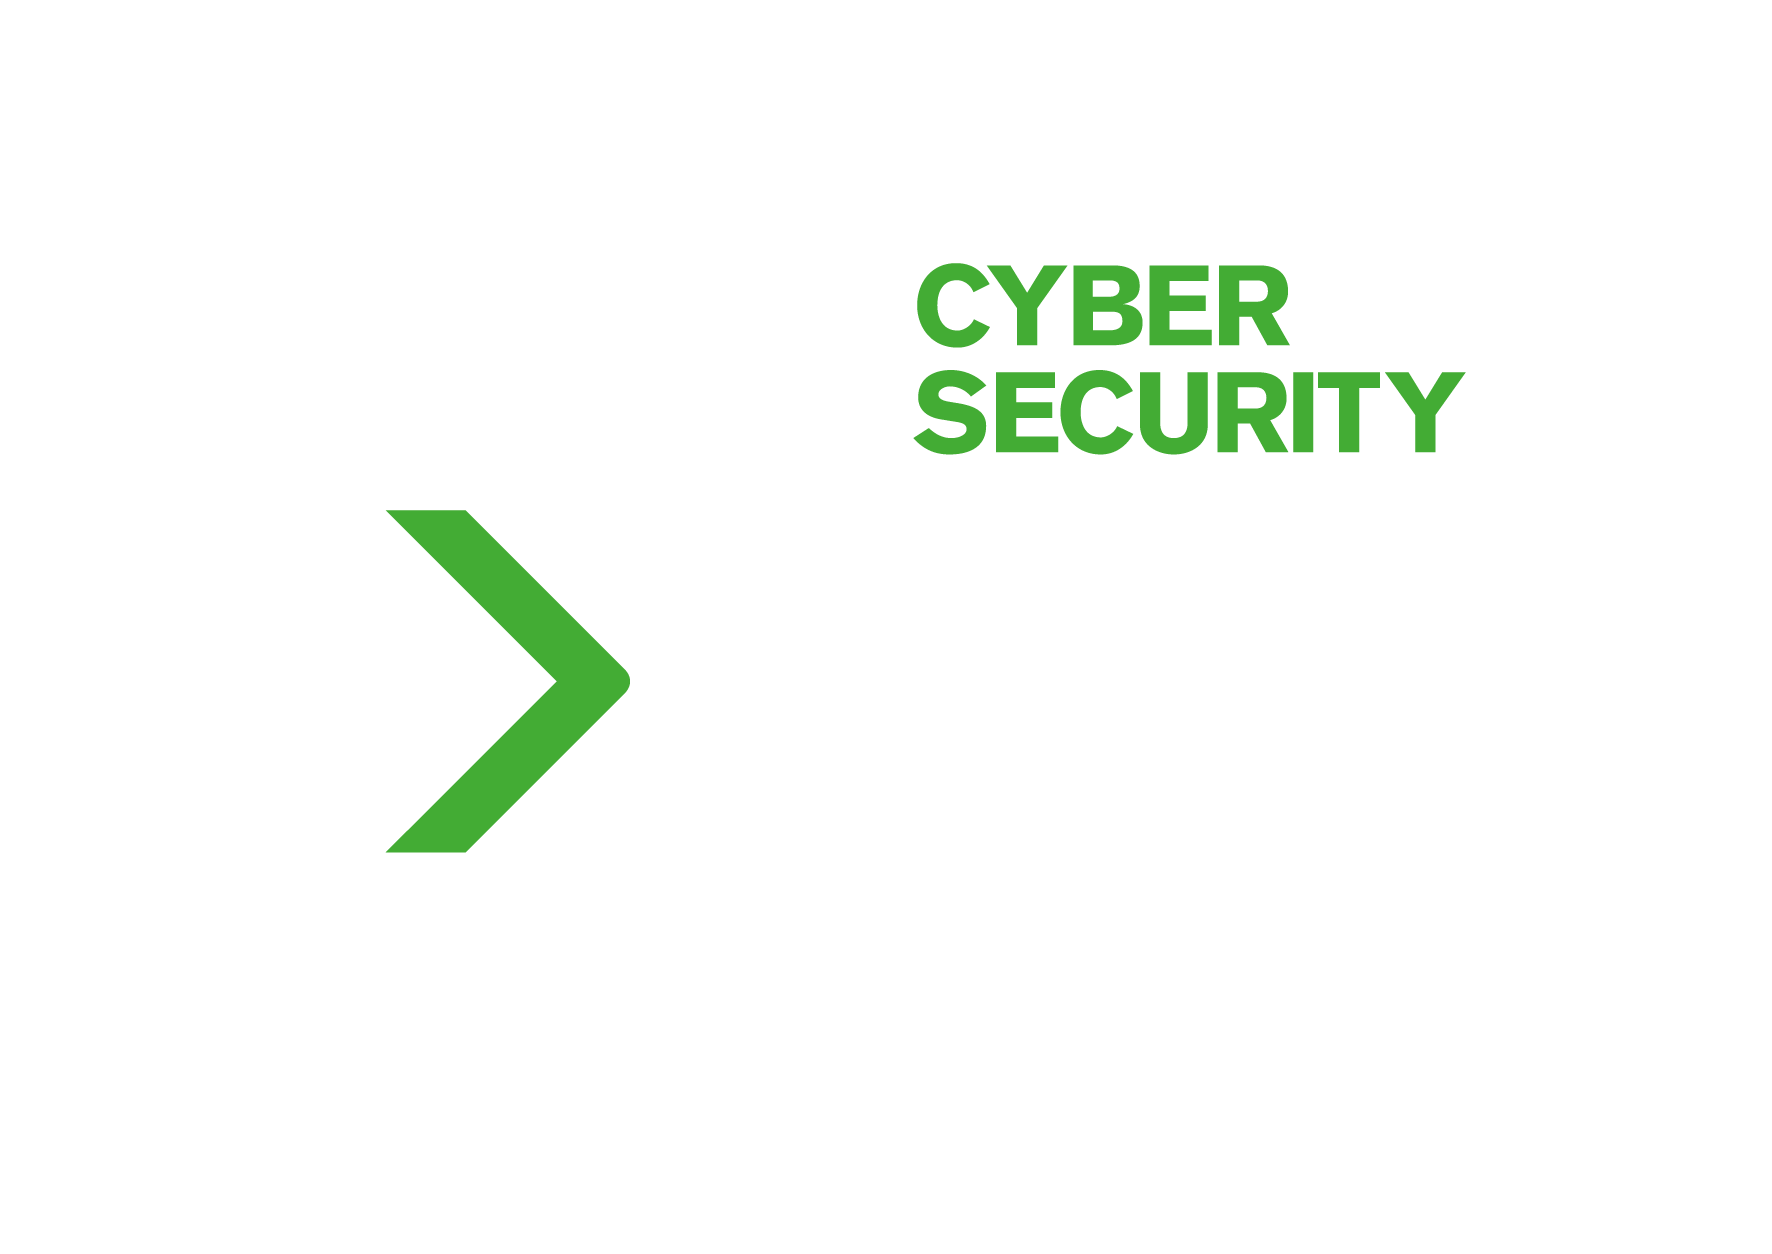 Cyber Security Expo 2021